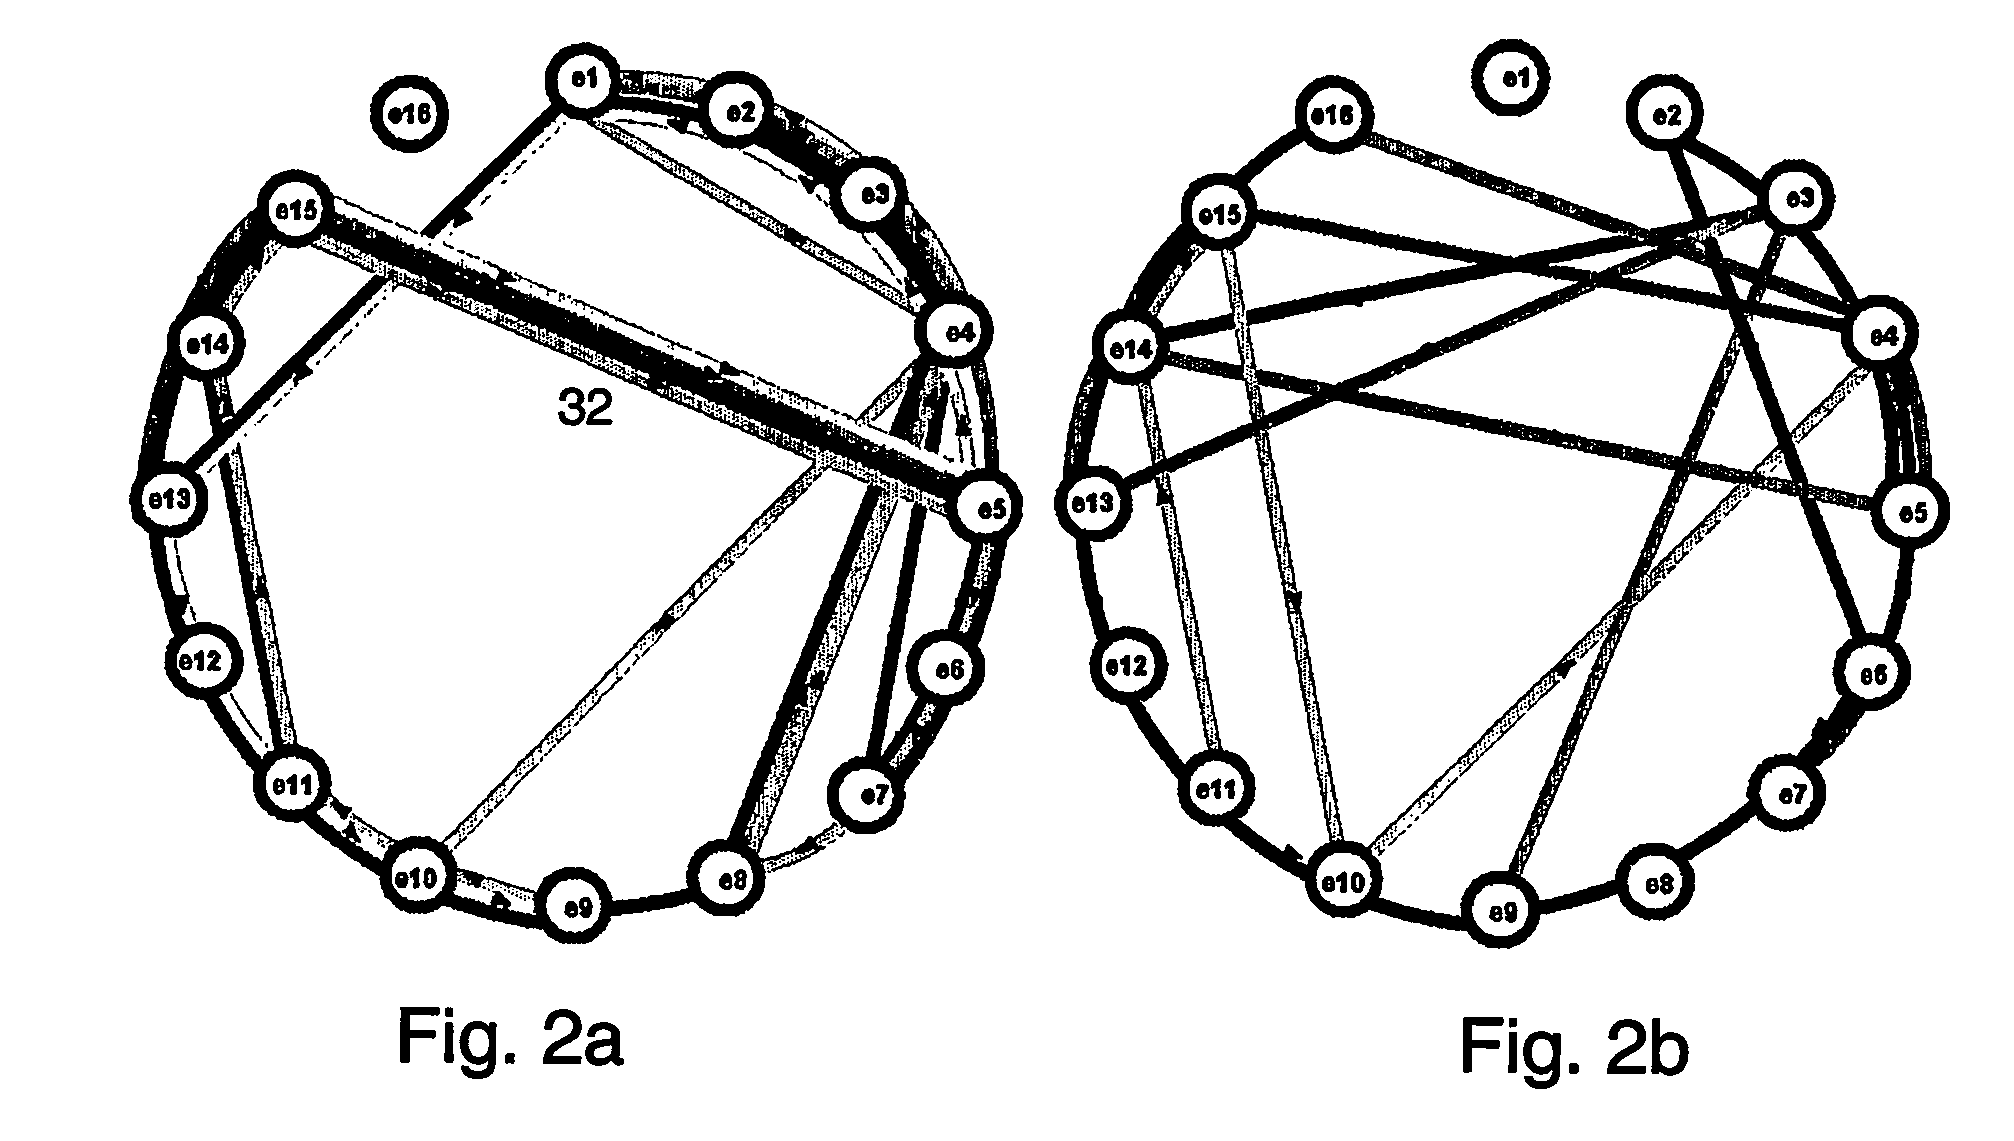 Method and apparatus for learning, recognizing and generalizing sequences